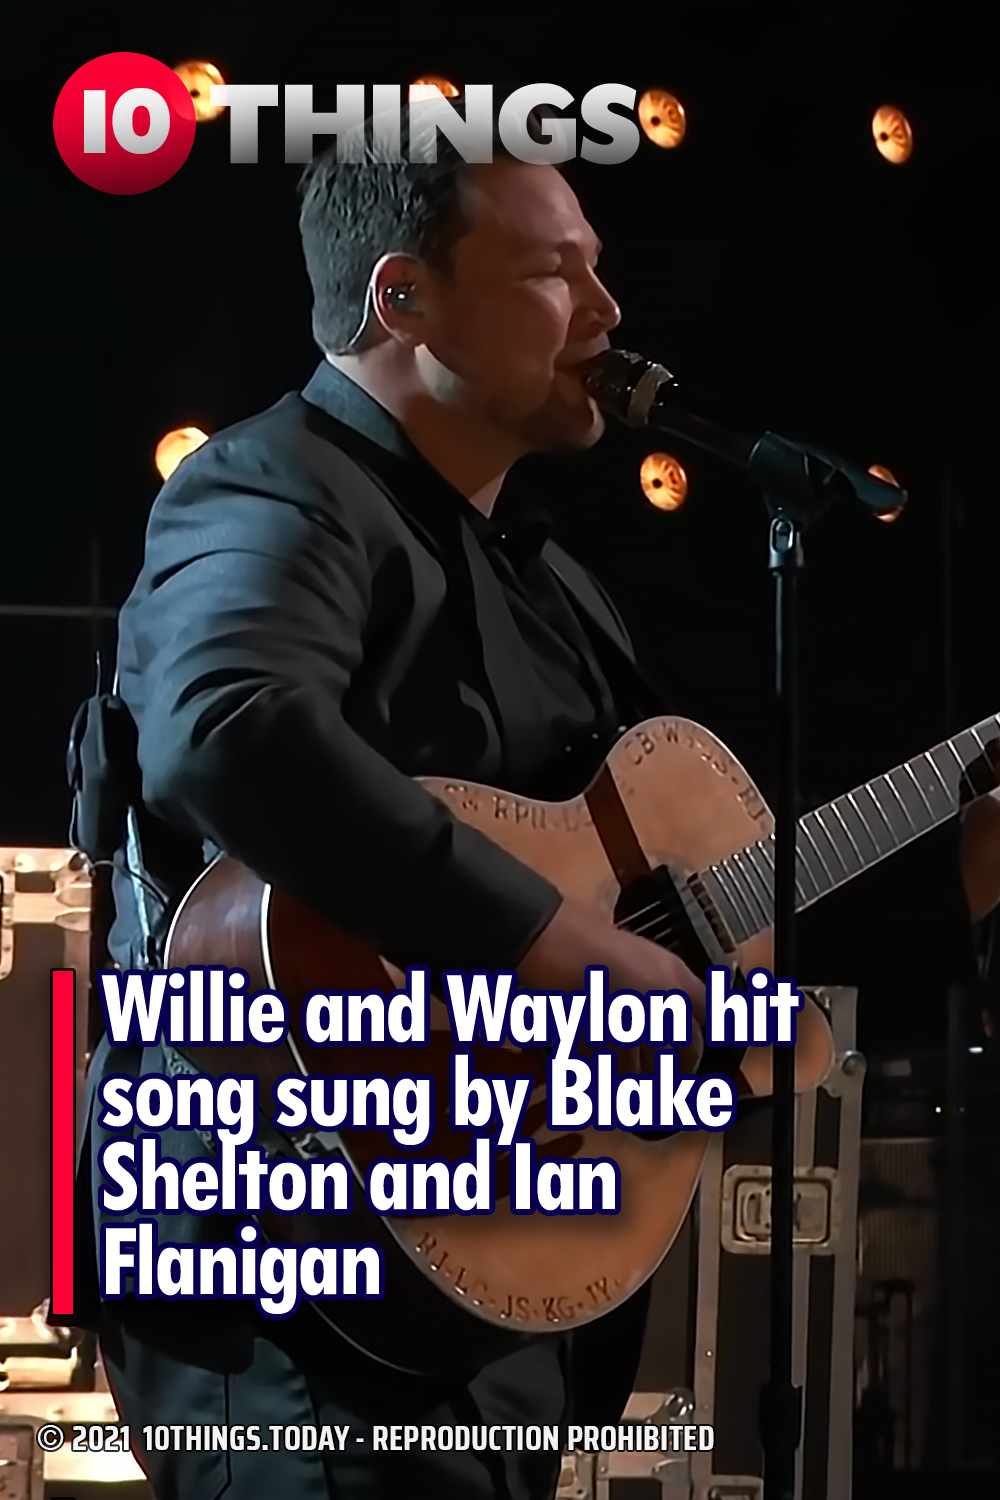 Willie and Waylon hit song sung by Blake Shelton and Ian Flanigan